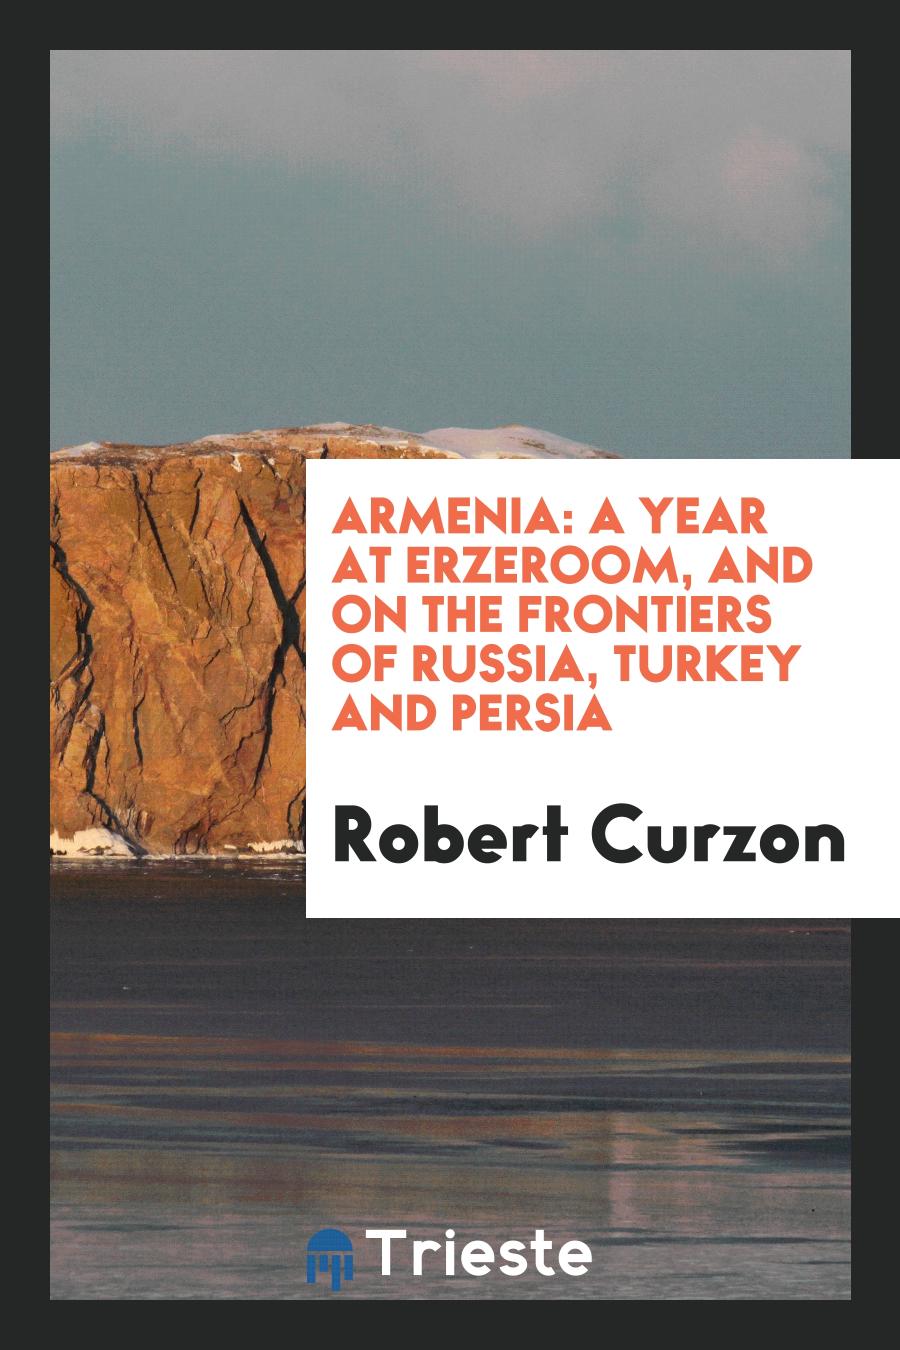 Armenia: A Year at Erzeroom, and on the Frontiers of Russia, Turkey and Persia